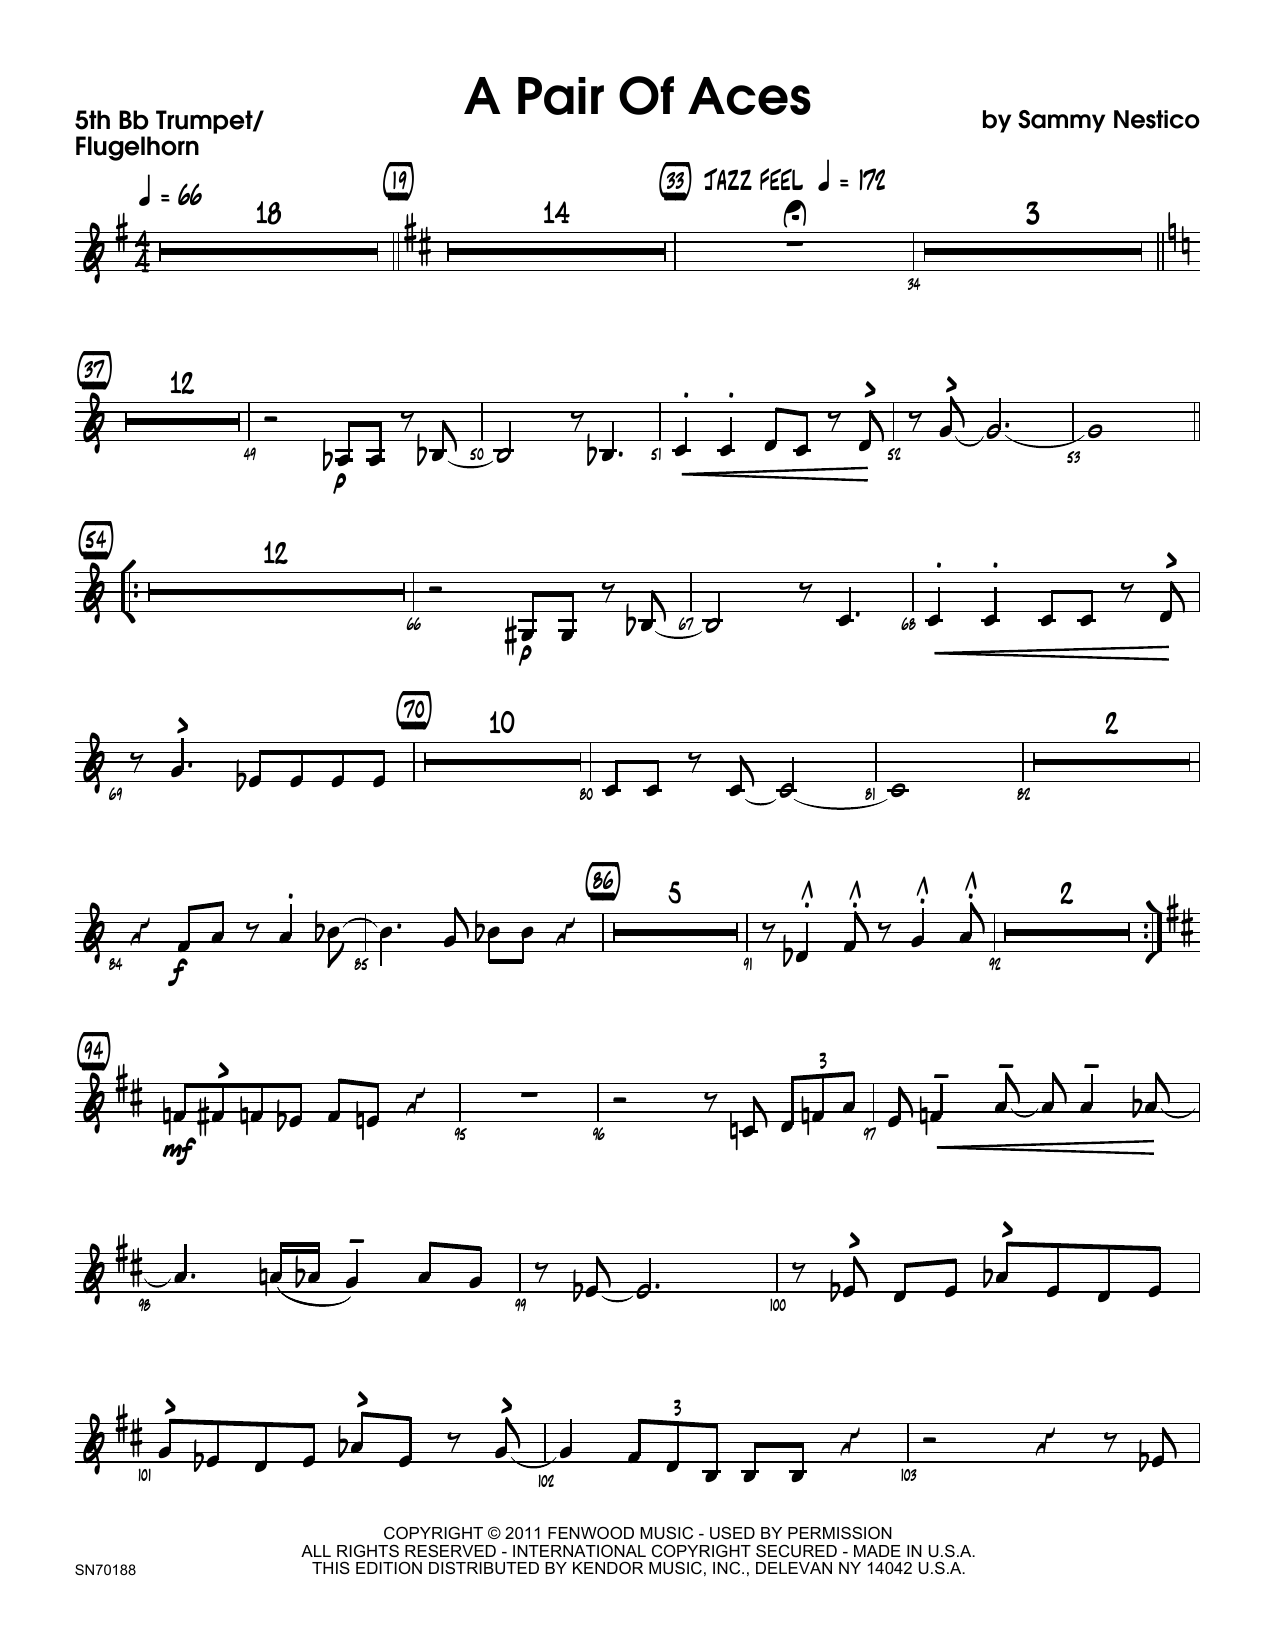 Download Sammy Nestico A Pair Of Aces - 5th Bb Trumpet Sheet Music